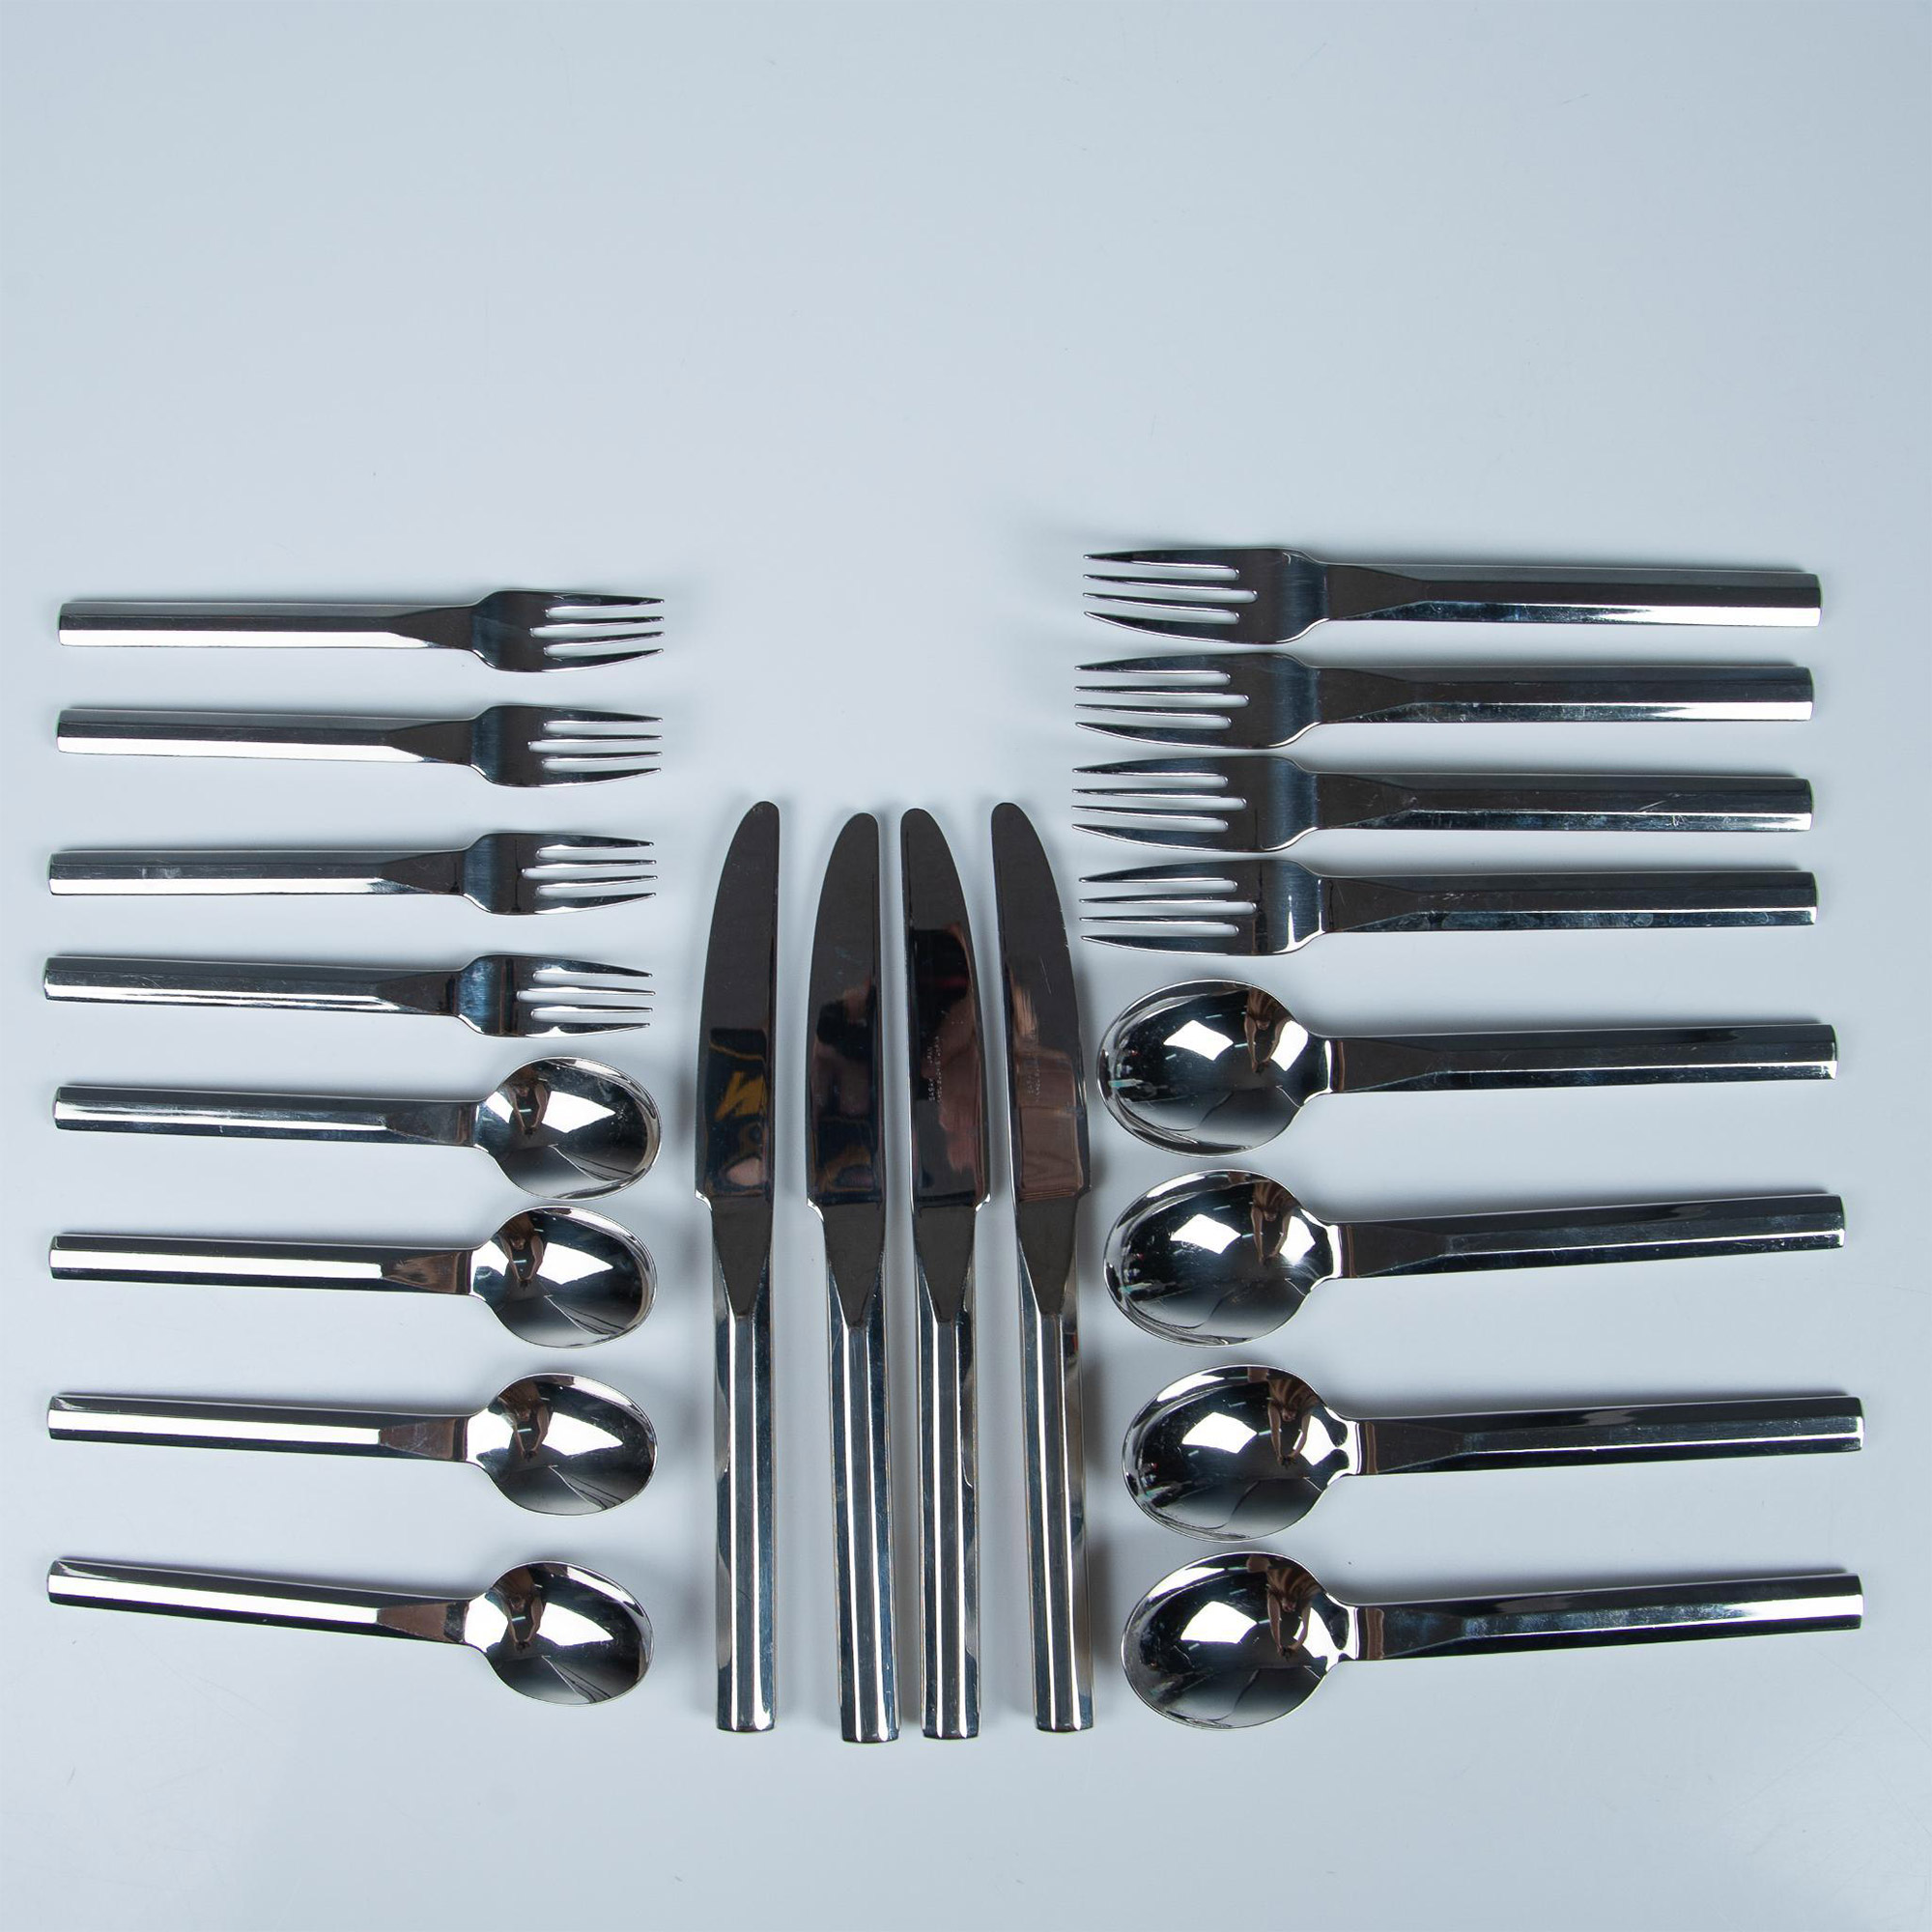 20pc Sasaki Stainless Steel Flatware Set, Service for 4 - Image 11 of 12